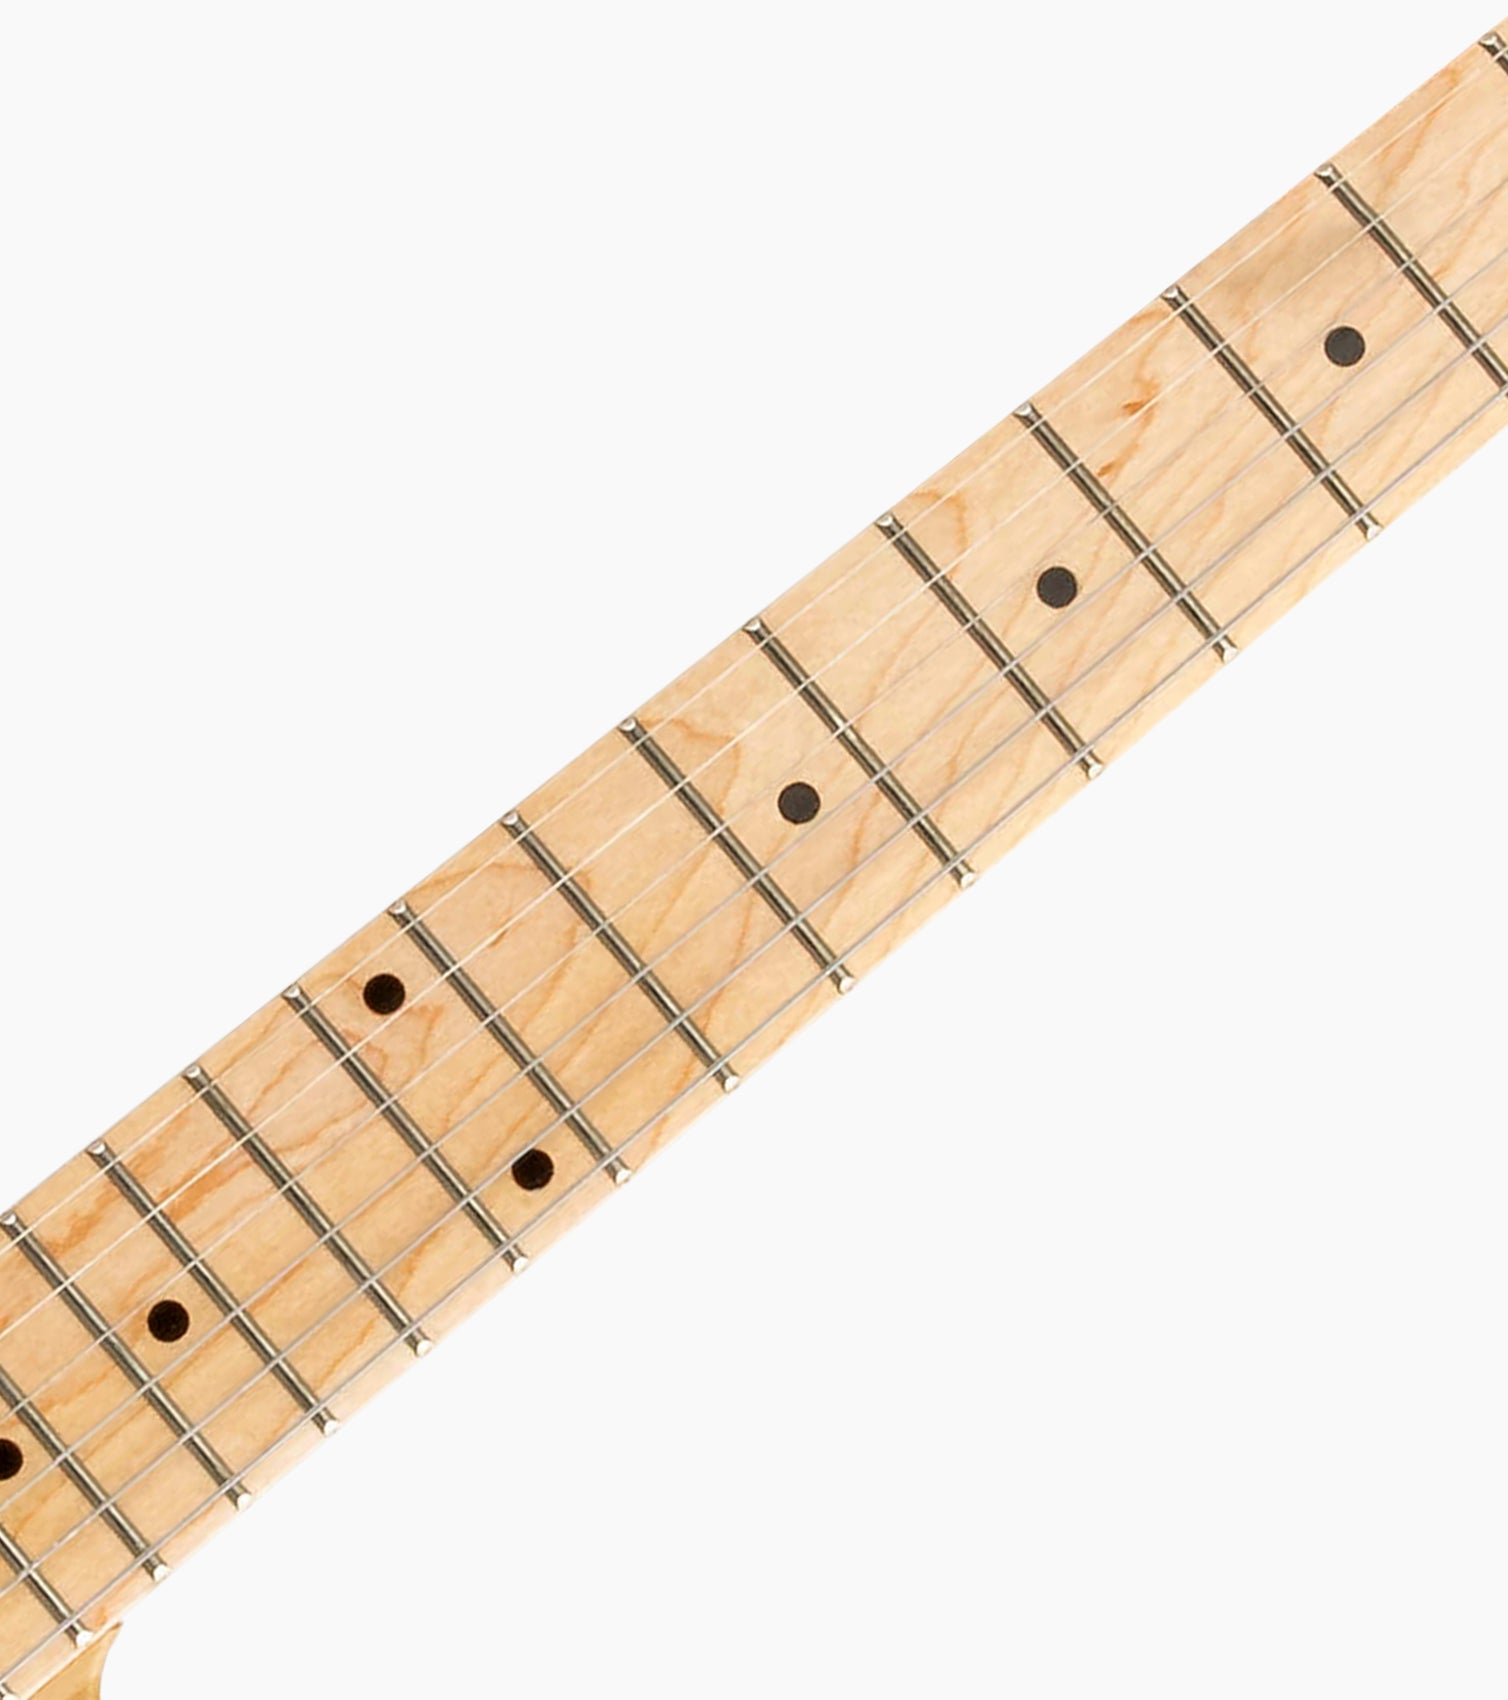 close-up of Left Handed Natural single-cutaway electric guitar fretboard